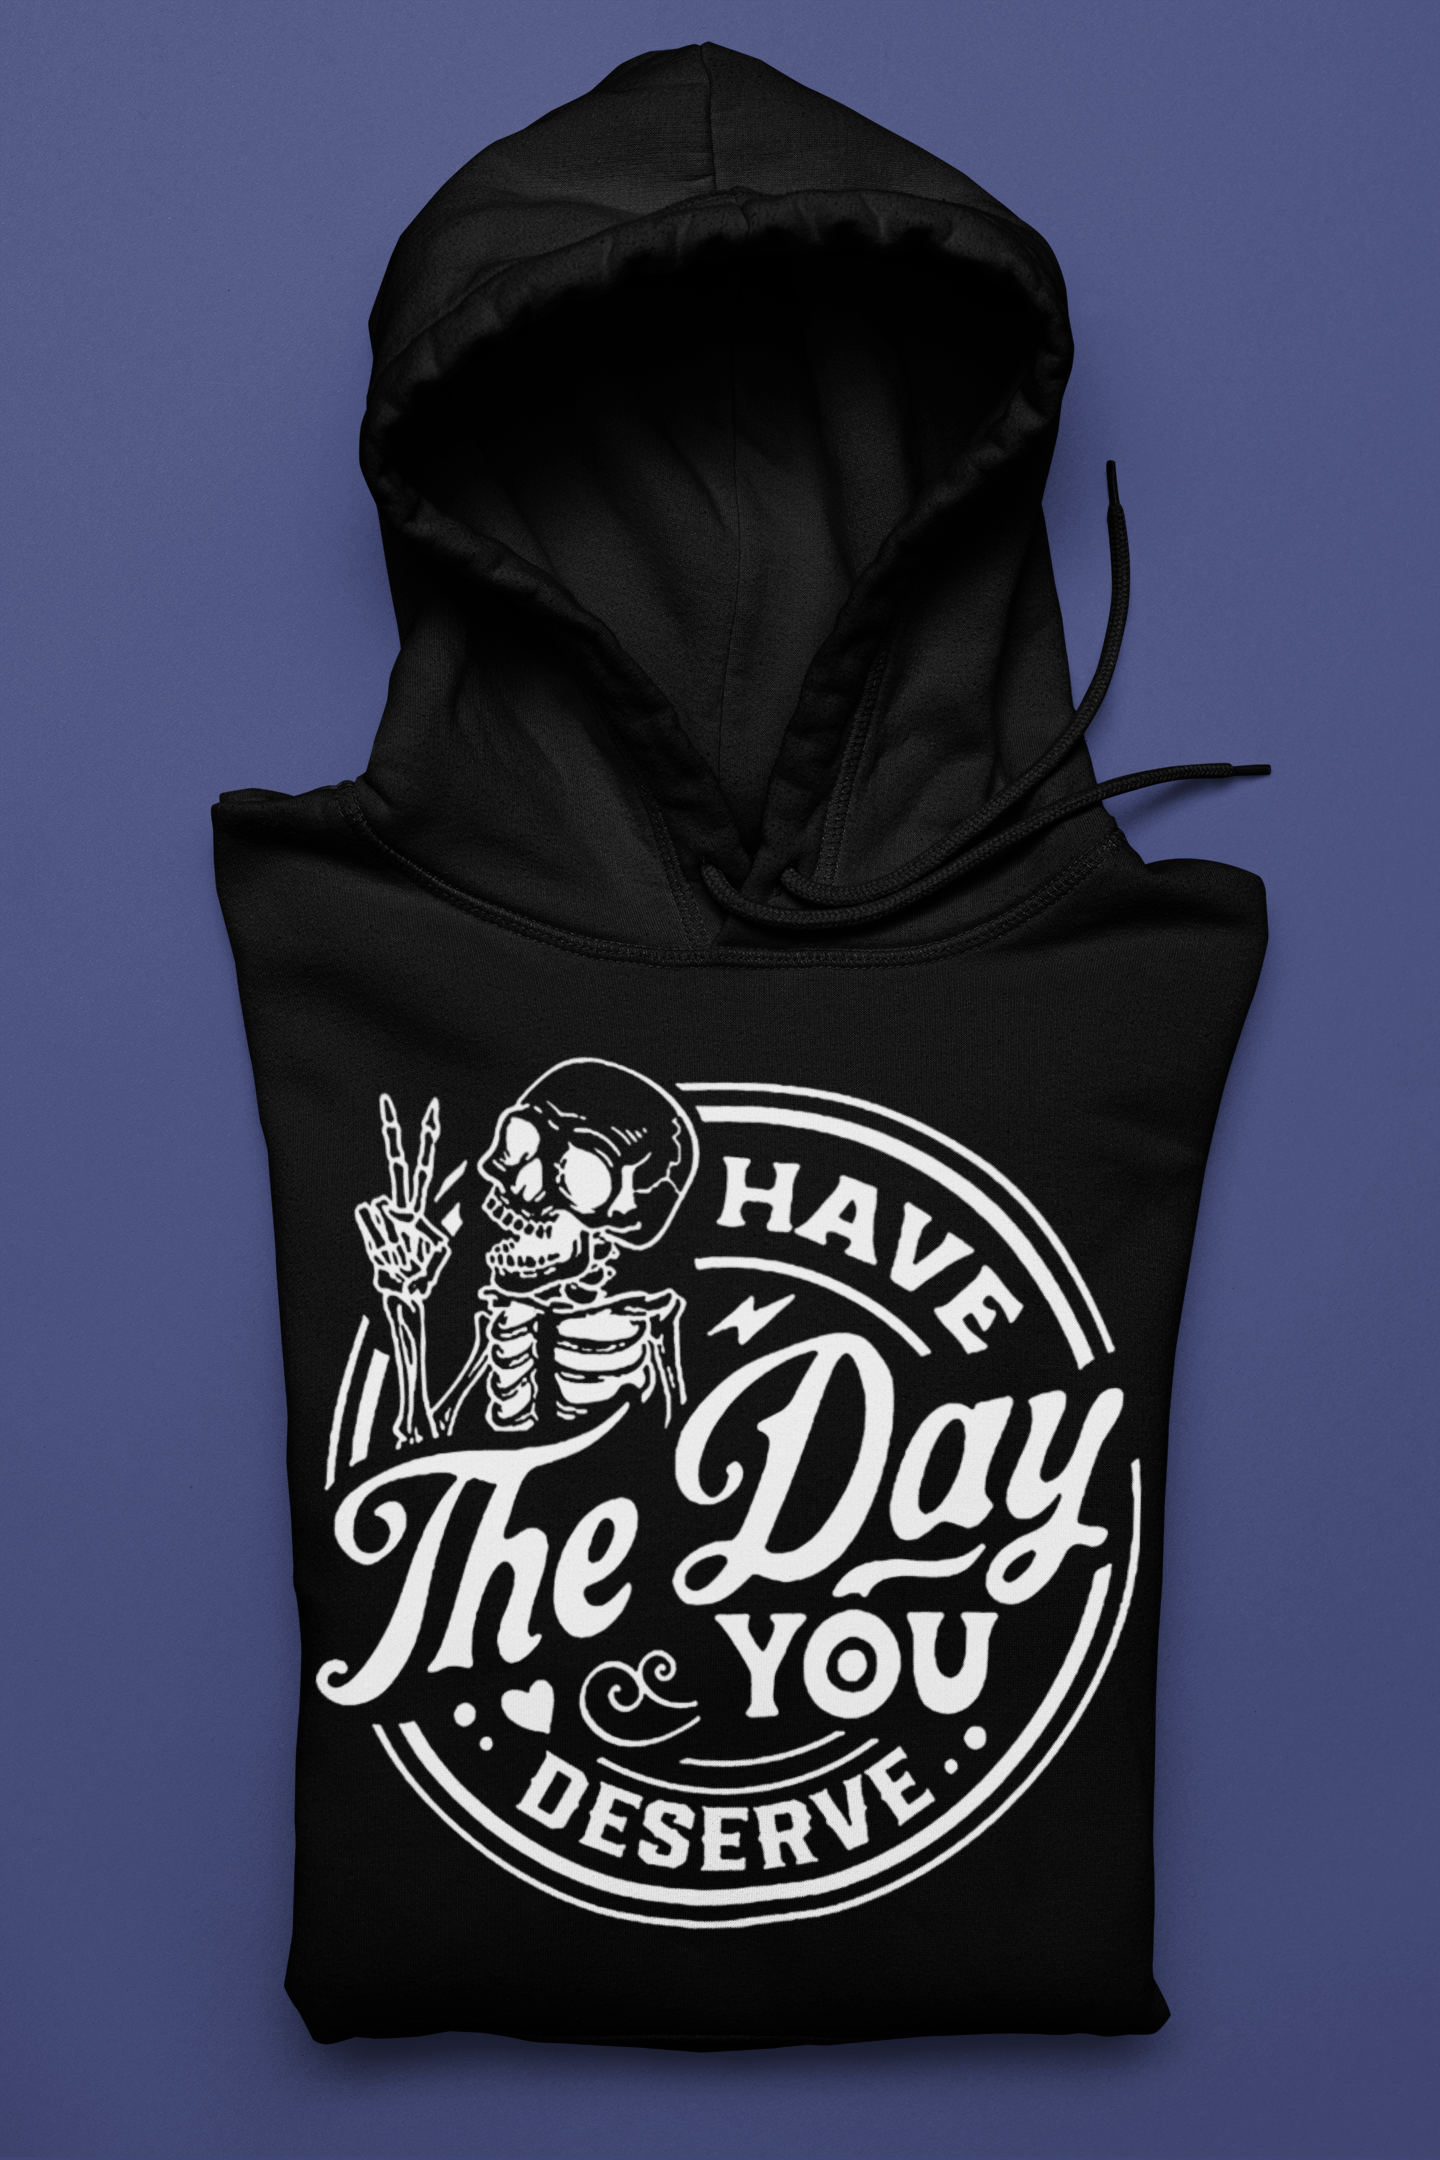 Have the Day You Deserve Hoodie